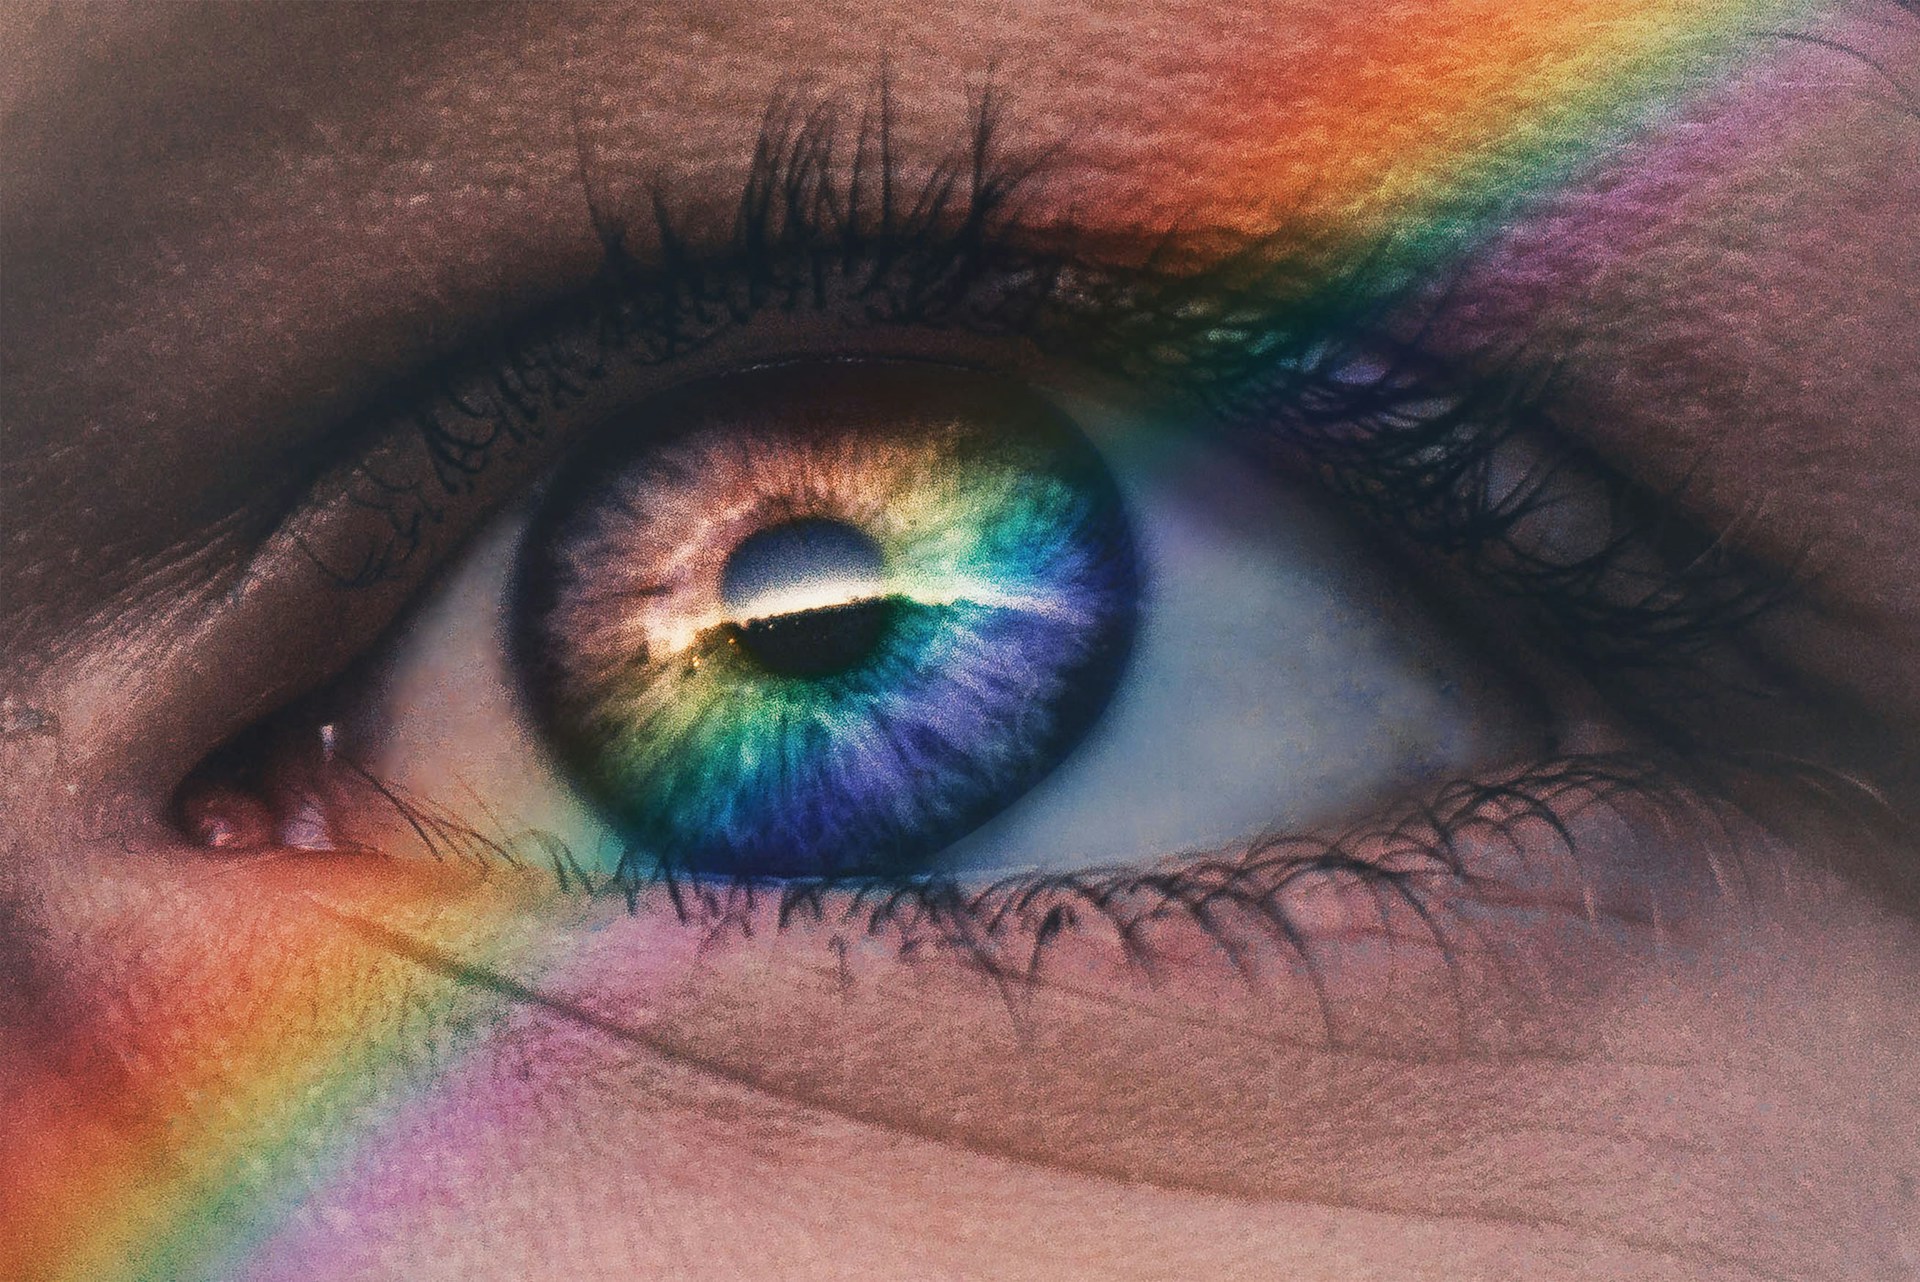 An eye with a rainbow superimposed over it